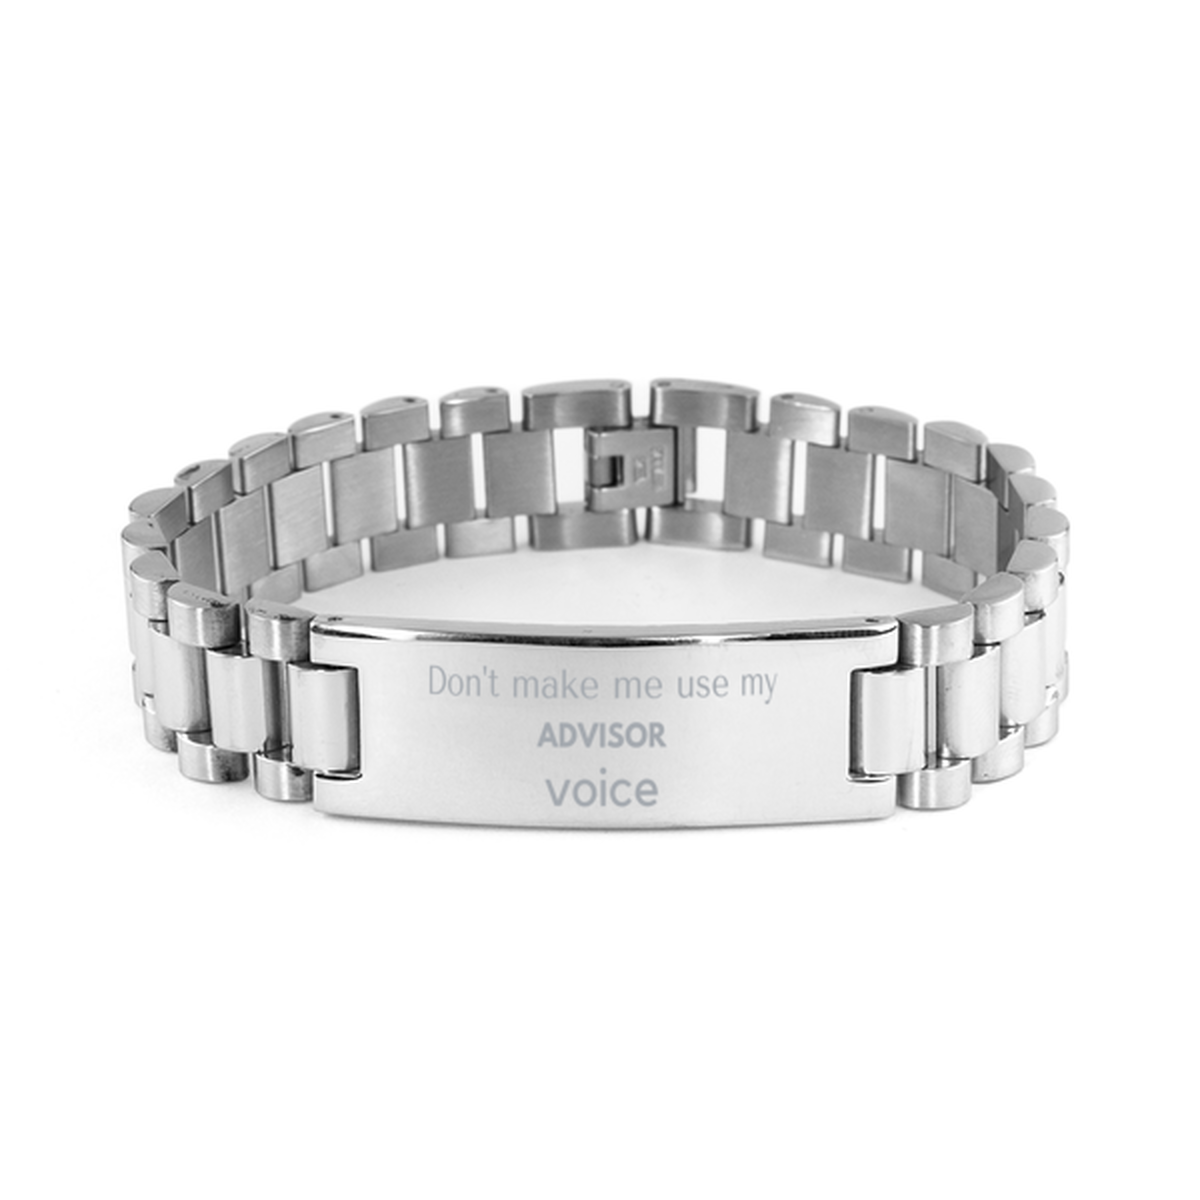 Don't make me use my Advisor voice, Sarcasm Advisor Gifts, Christmas Advisor Ladder Stainless Steel Bracelet Birthday Unique Gifts For Advisor Coworkers, Men, Women, Colleague, Friends